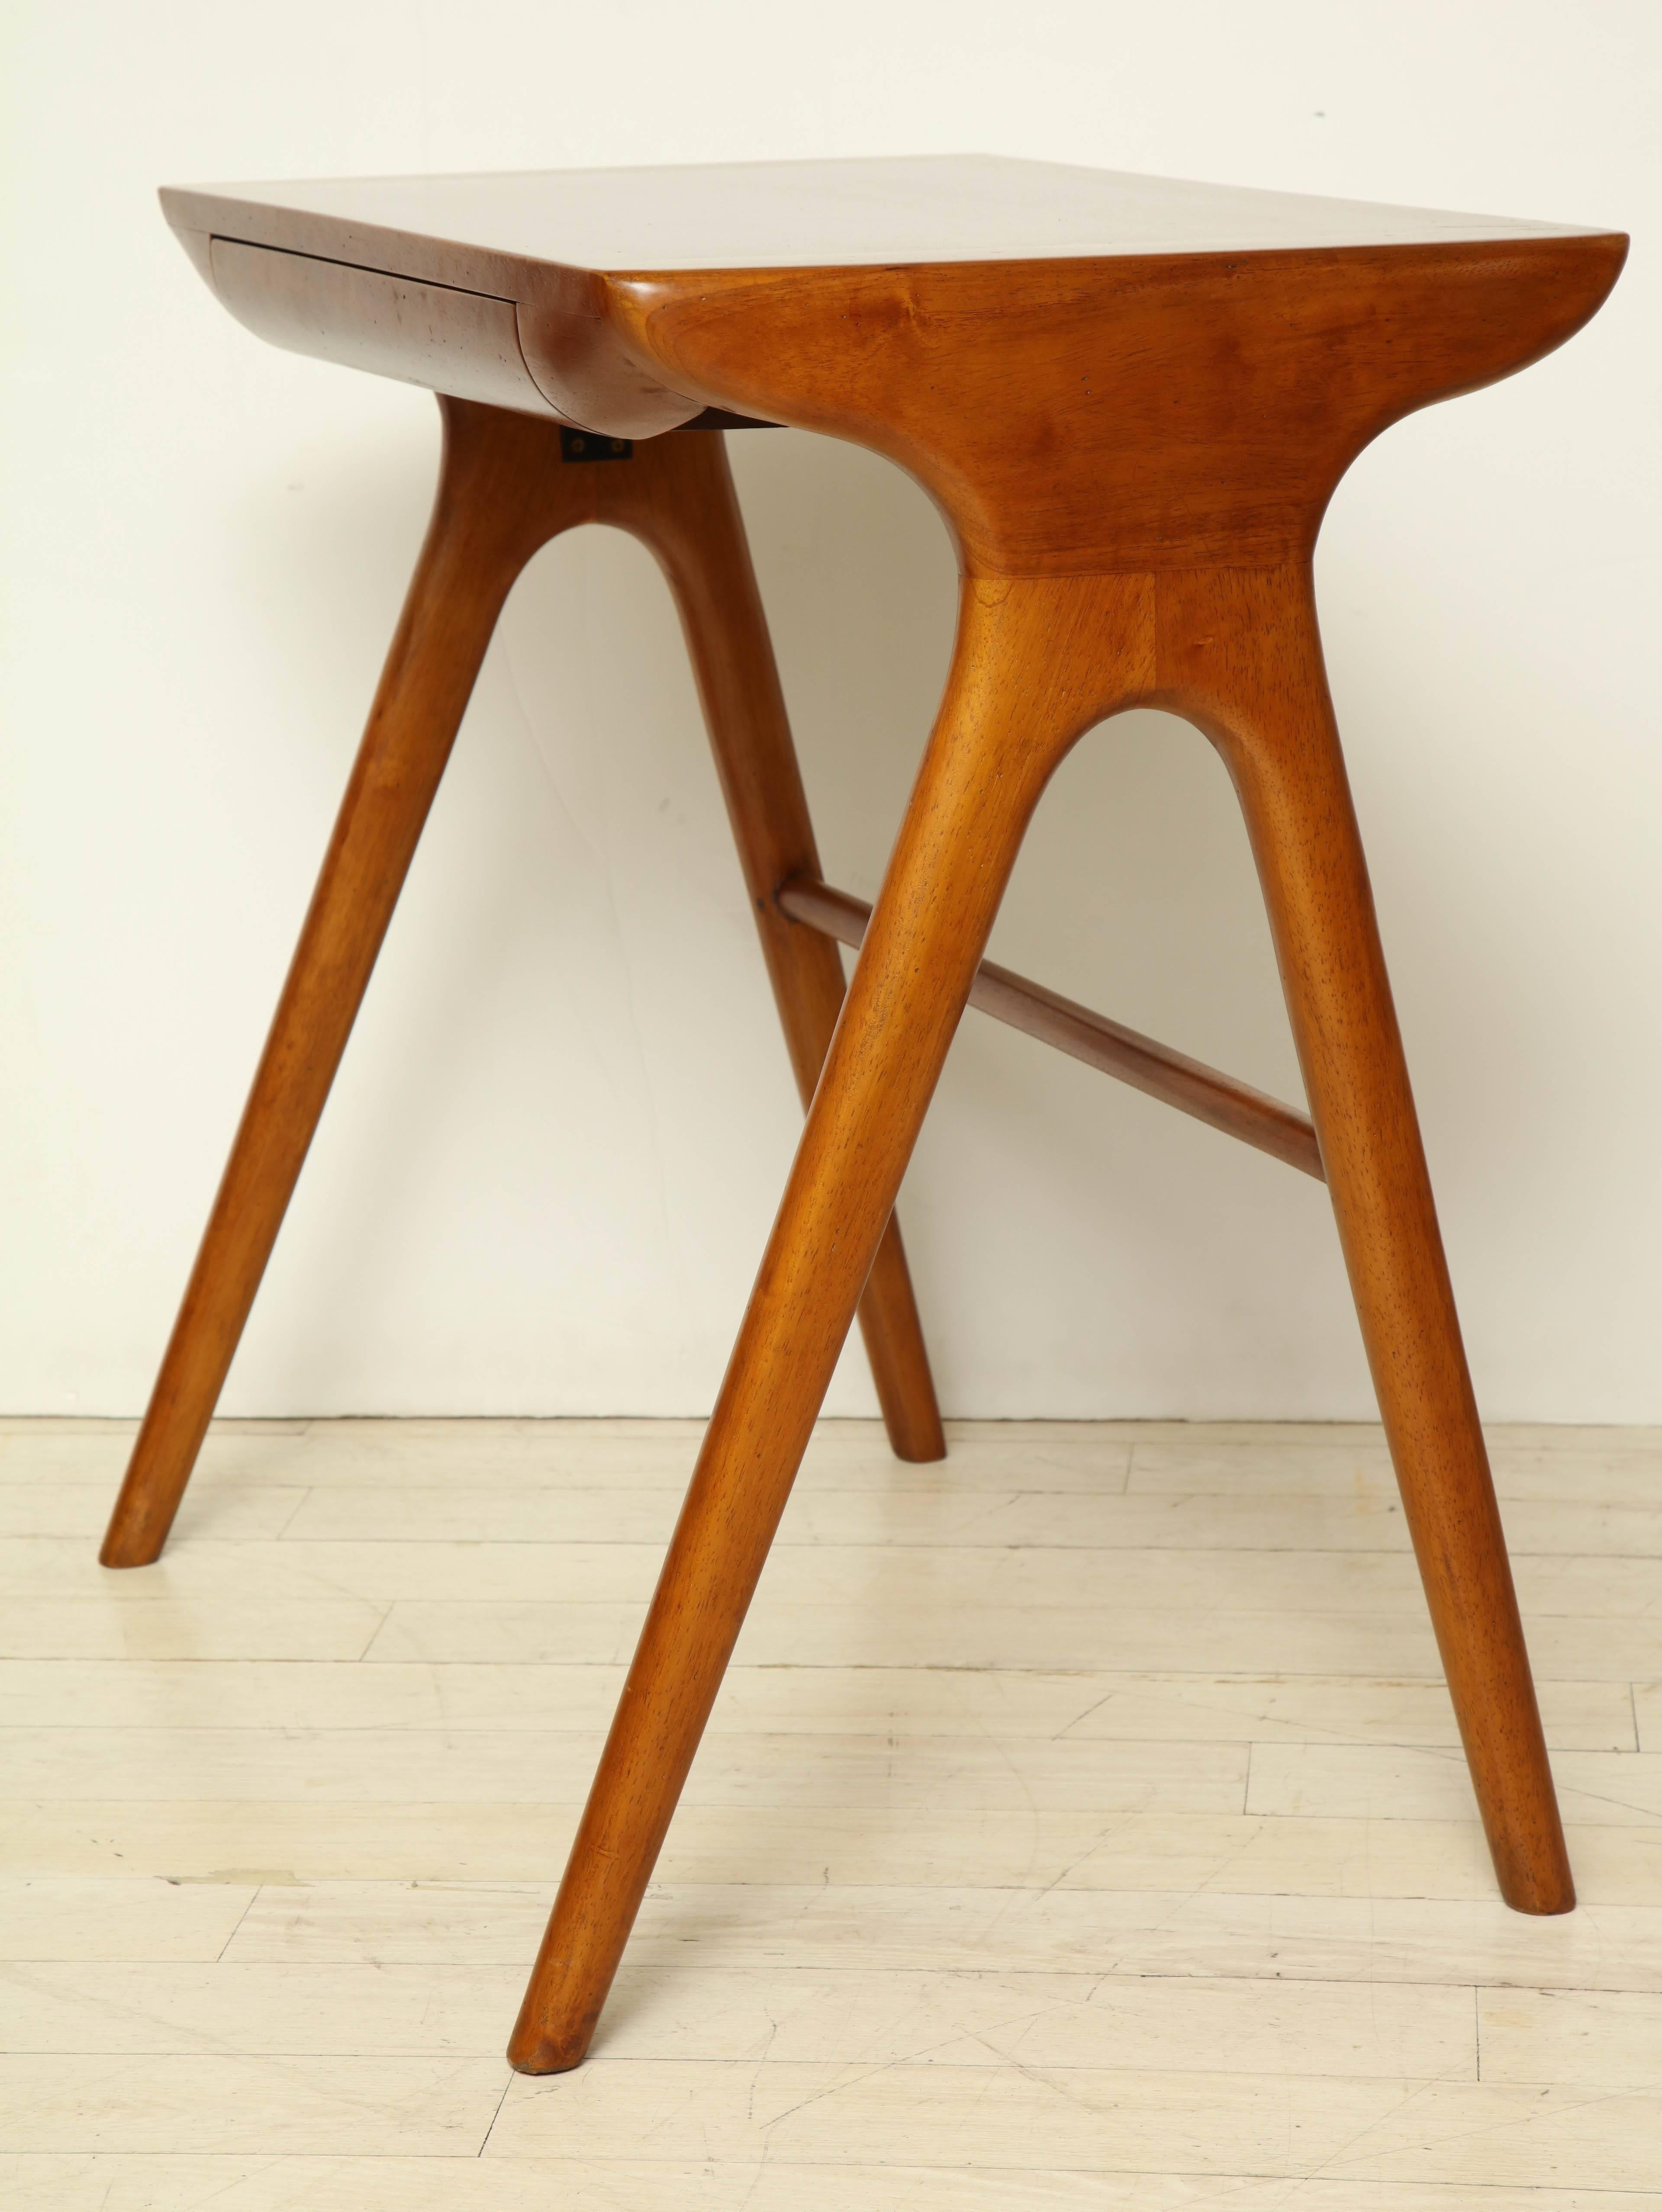 Mid-20th Century Small Mid-Century Cherry Wood Desk with Matching Chair, France, circa 1960